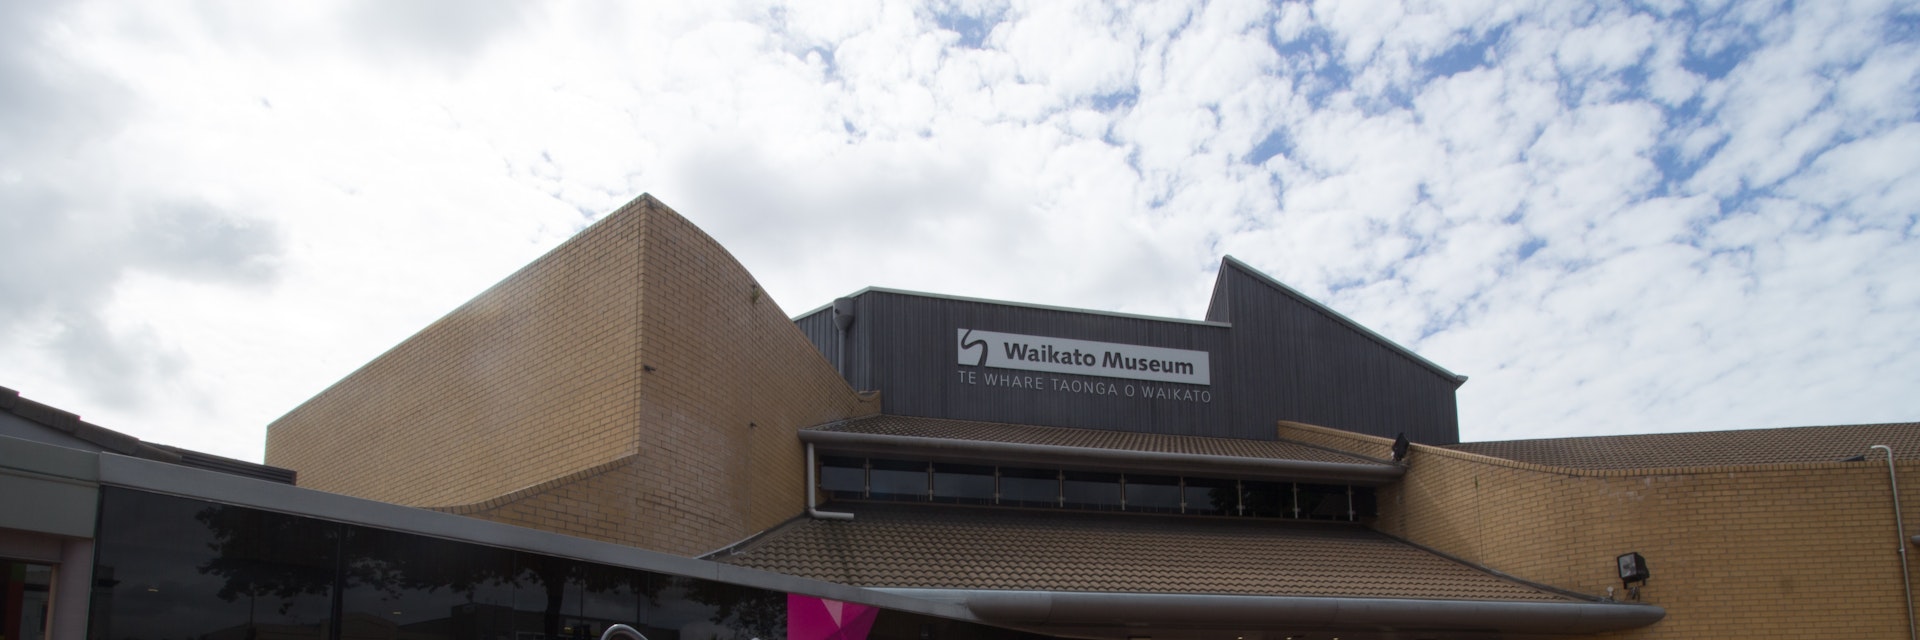 Facade of the Waikato Museum, a regional art museum and cultural center in Hamilton, New Zealand.